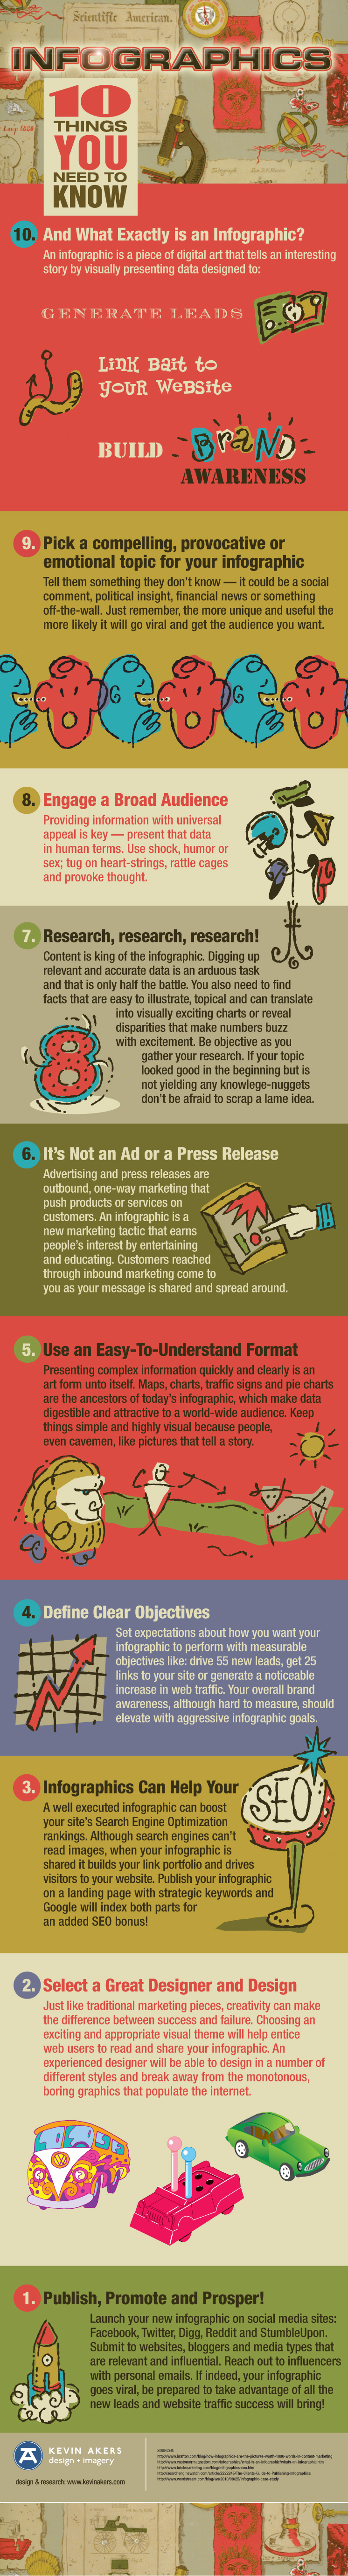 Infographics: 10 Things You Need To Know